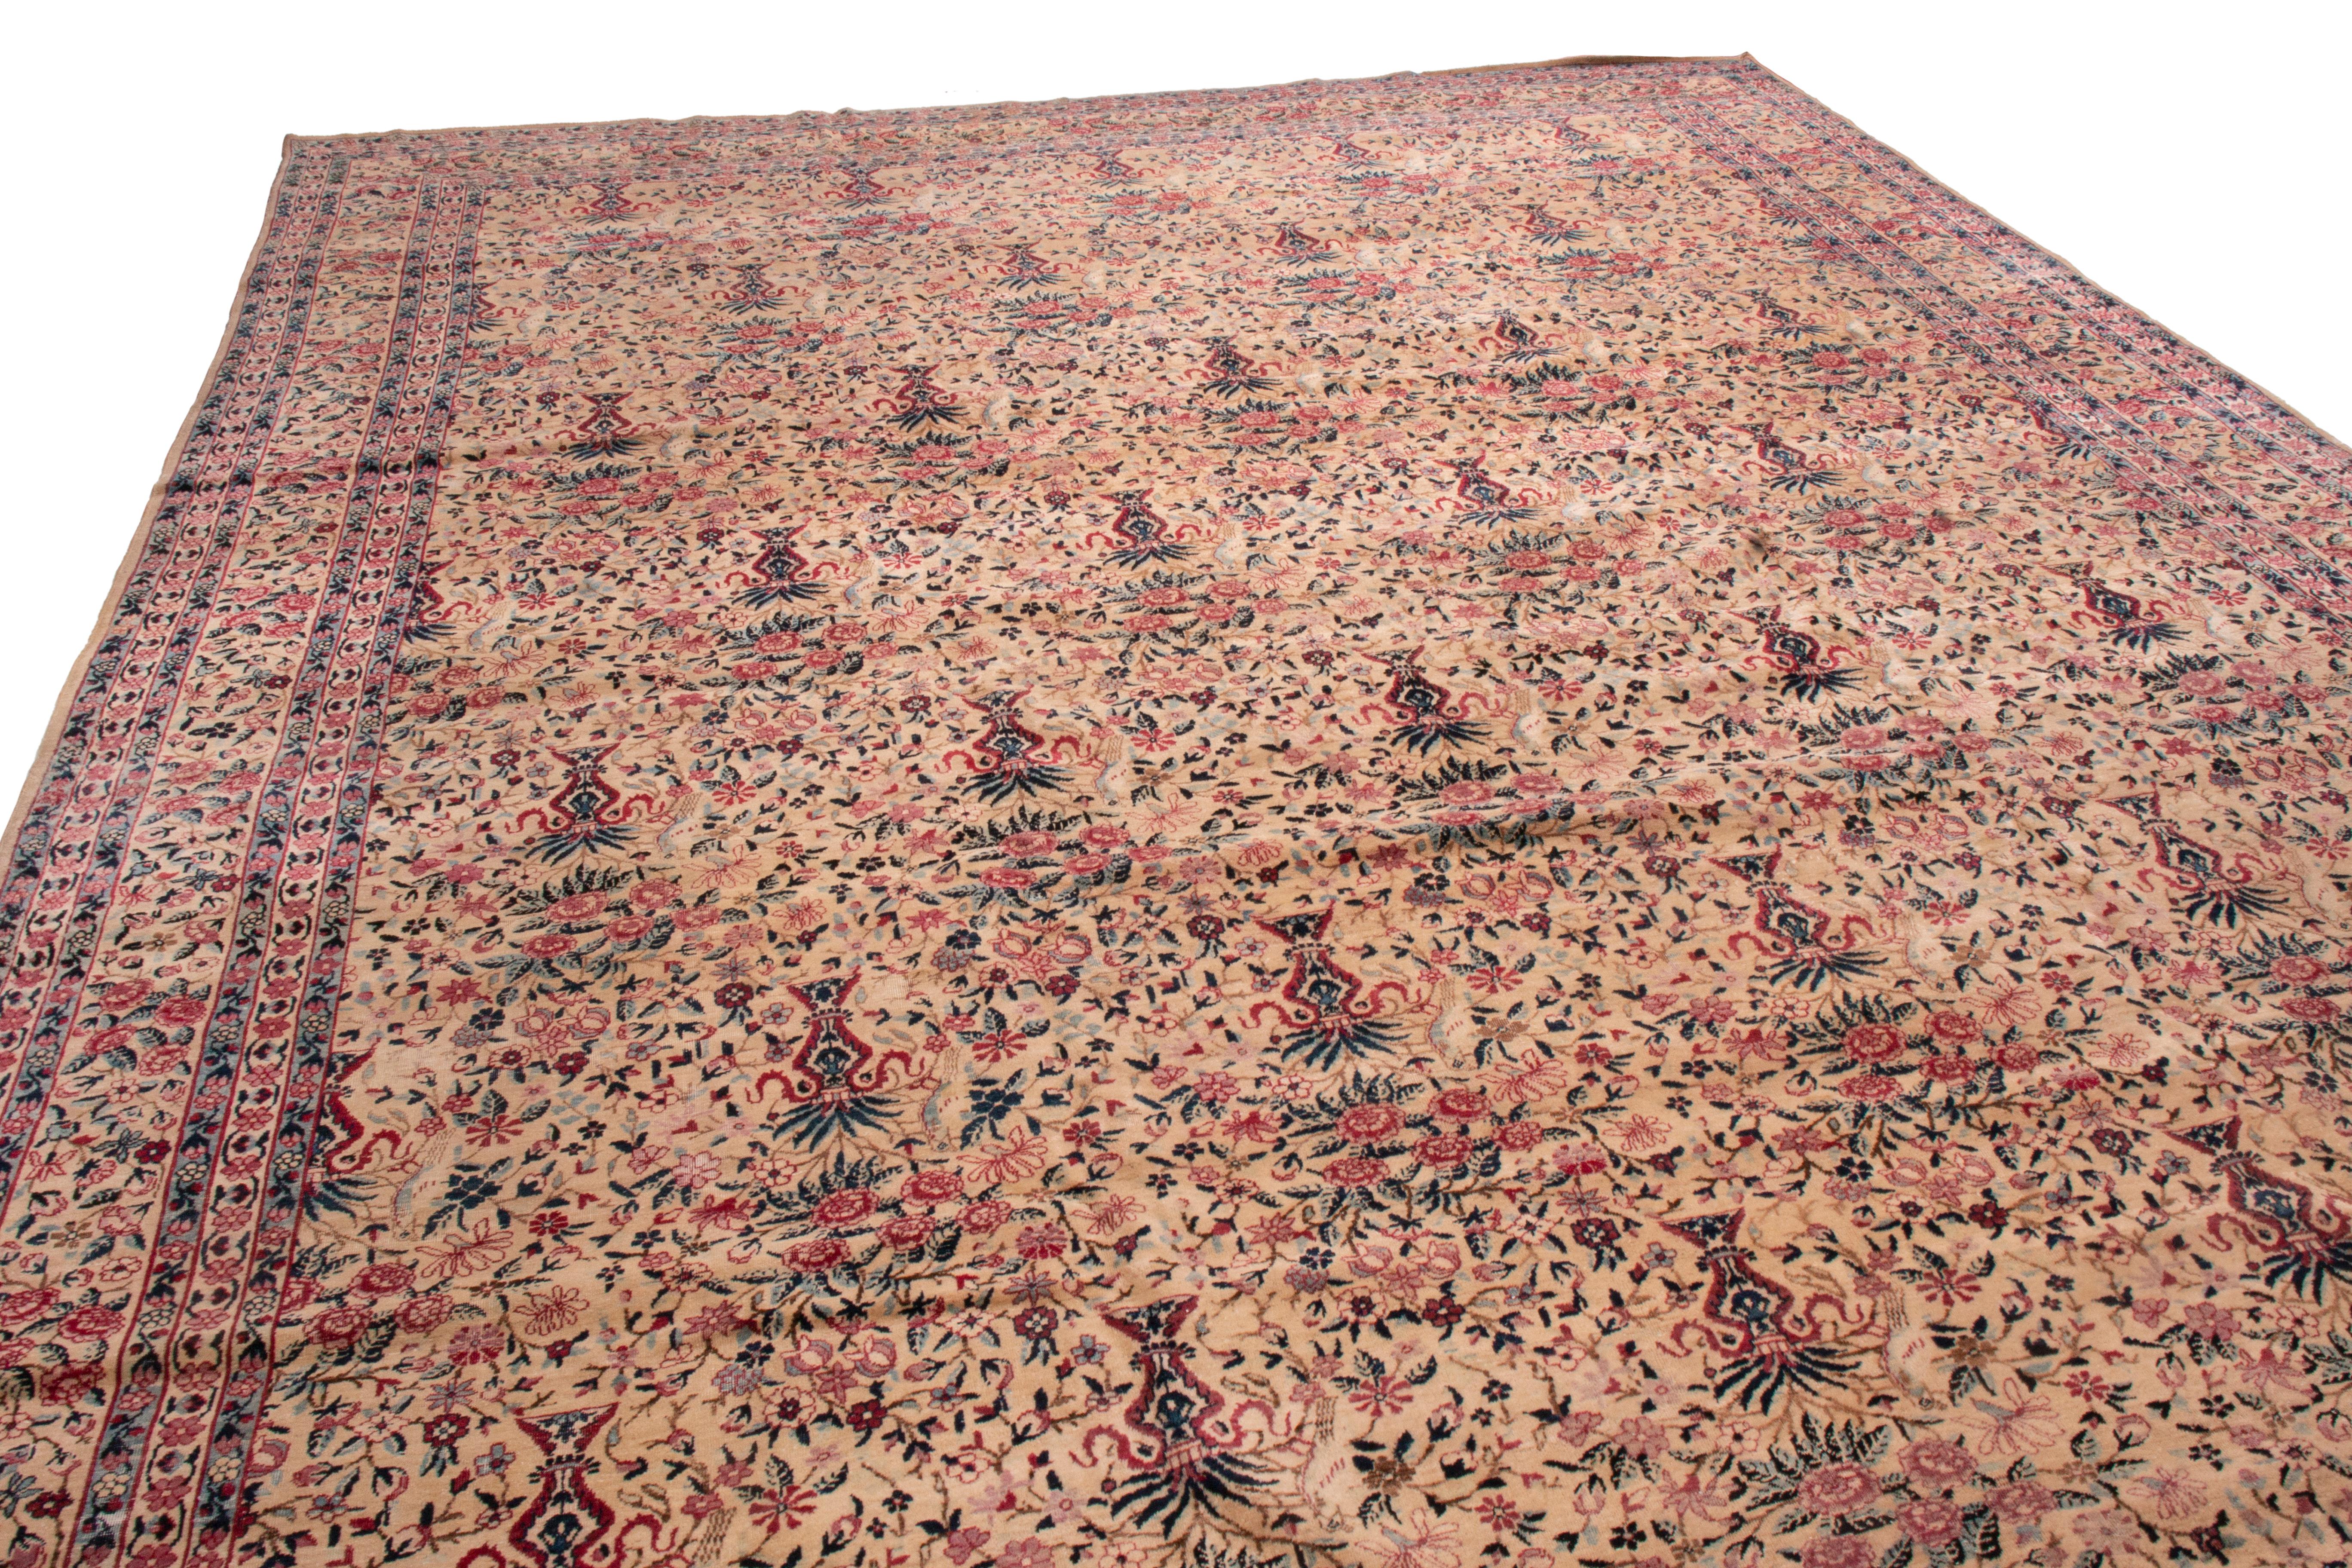 This antique Kerman Lavar rug is influenced by the Victorian era, the all-over field design depicts traditional floral vases and birds in purple, red, and green, though the vine scroll throughout the border isolates darker purple hues. This is a